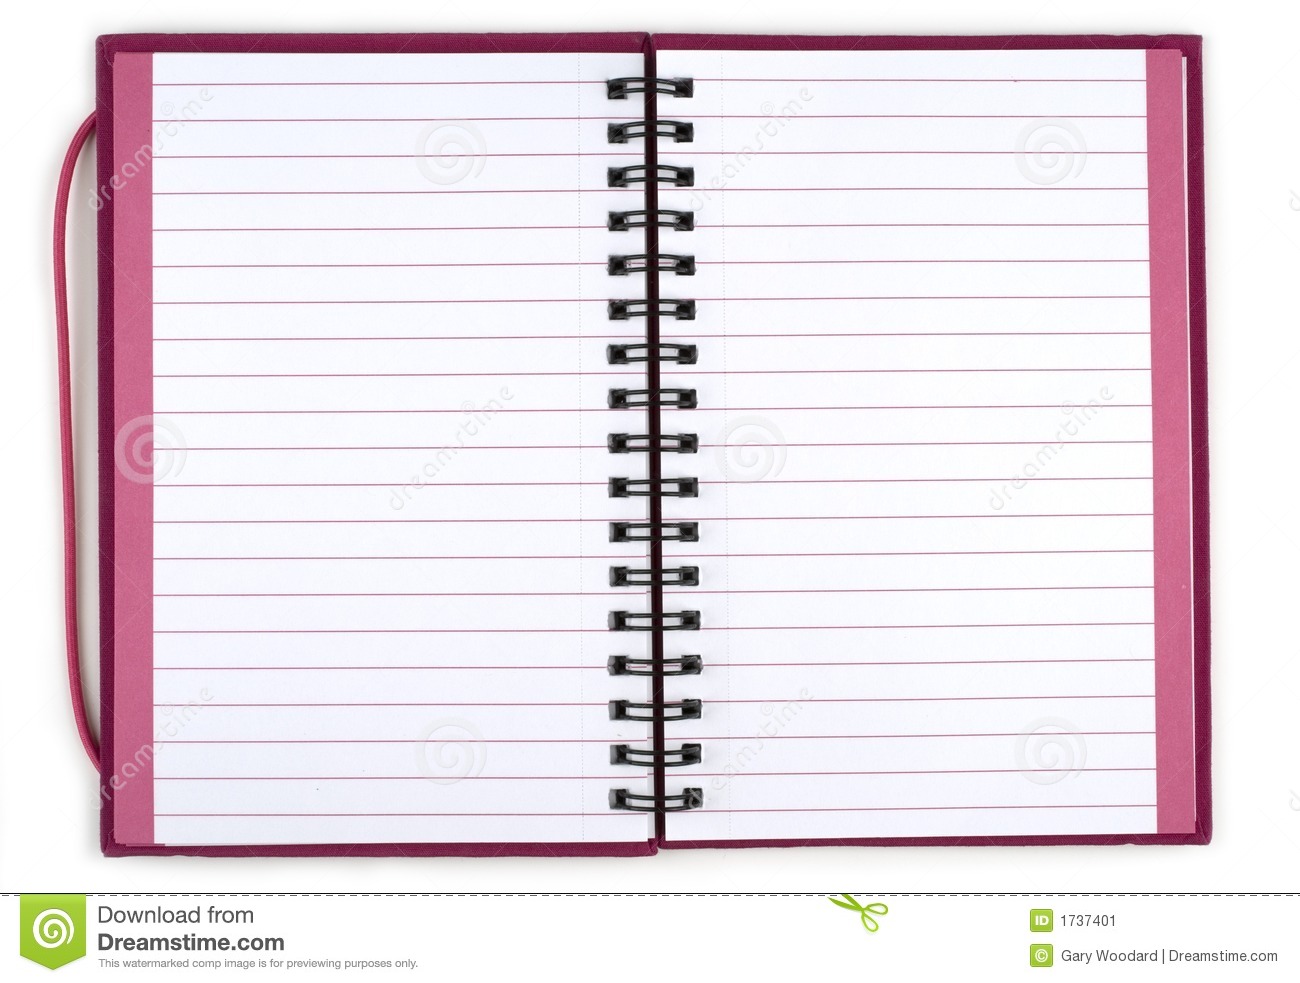 Opened Spiral Notebook  Stock Image   Image  1737401